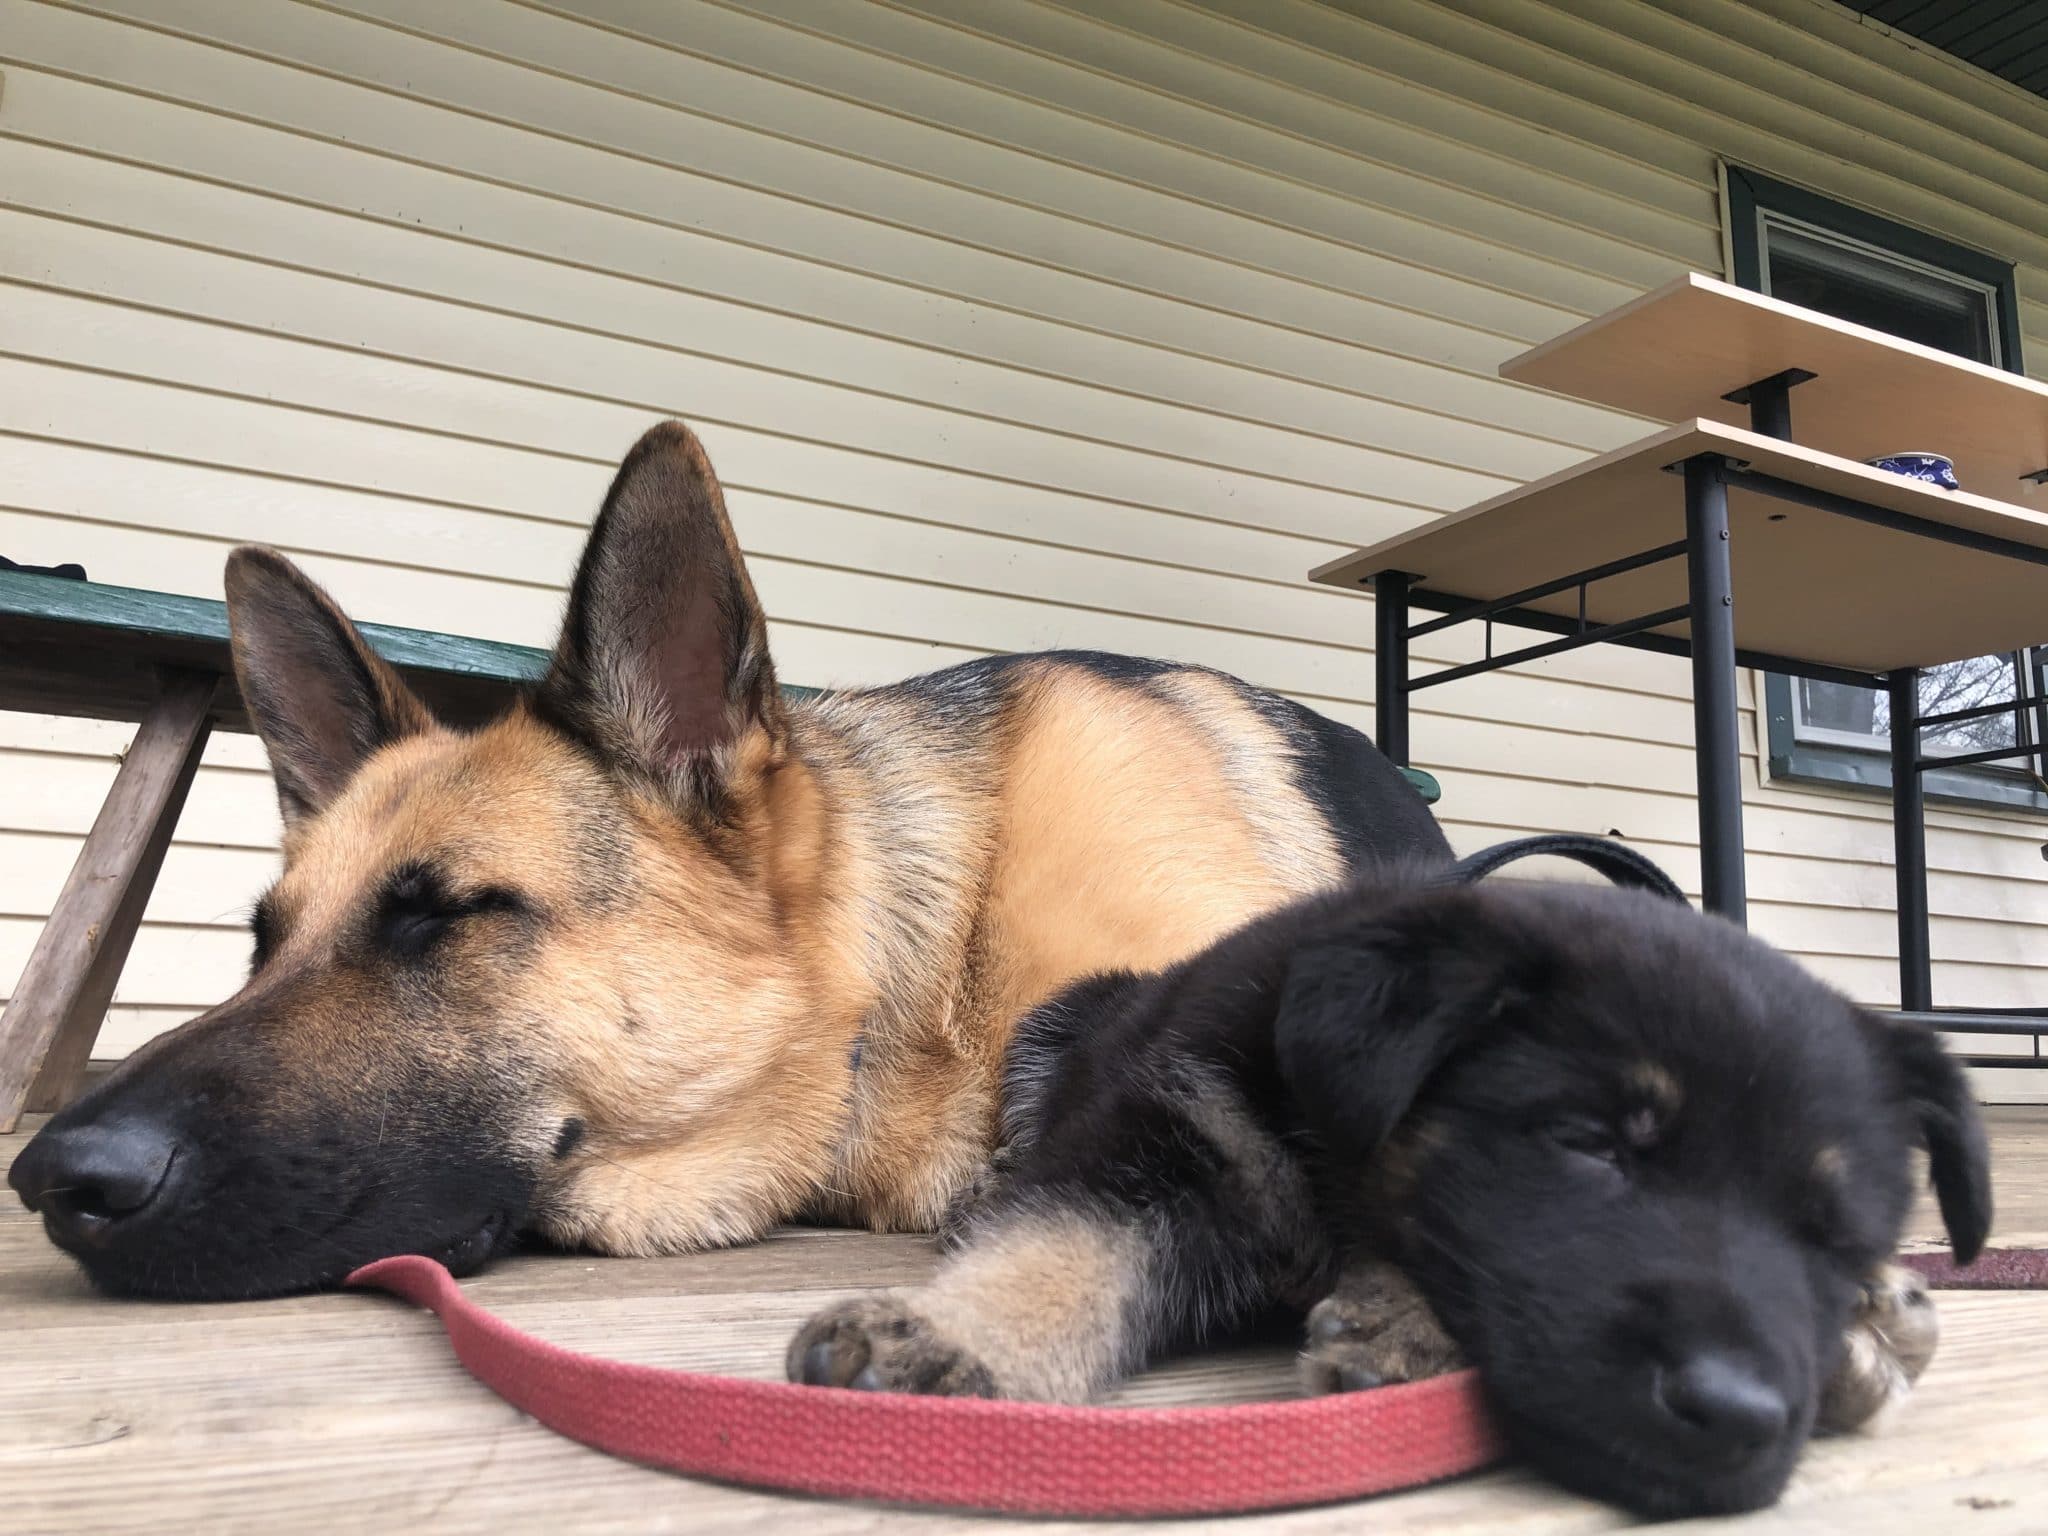 Gypsy and ike sleeping on porch